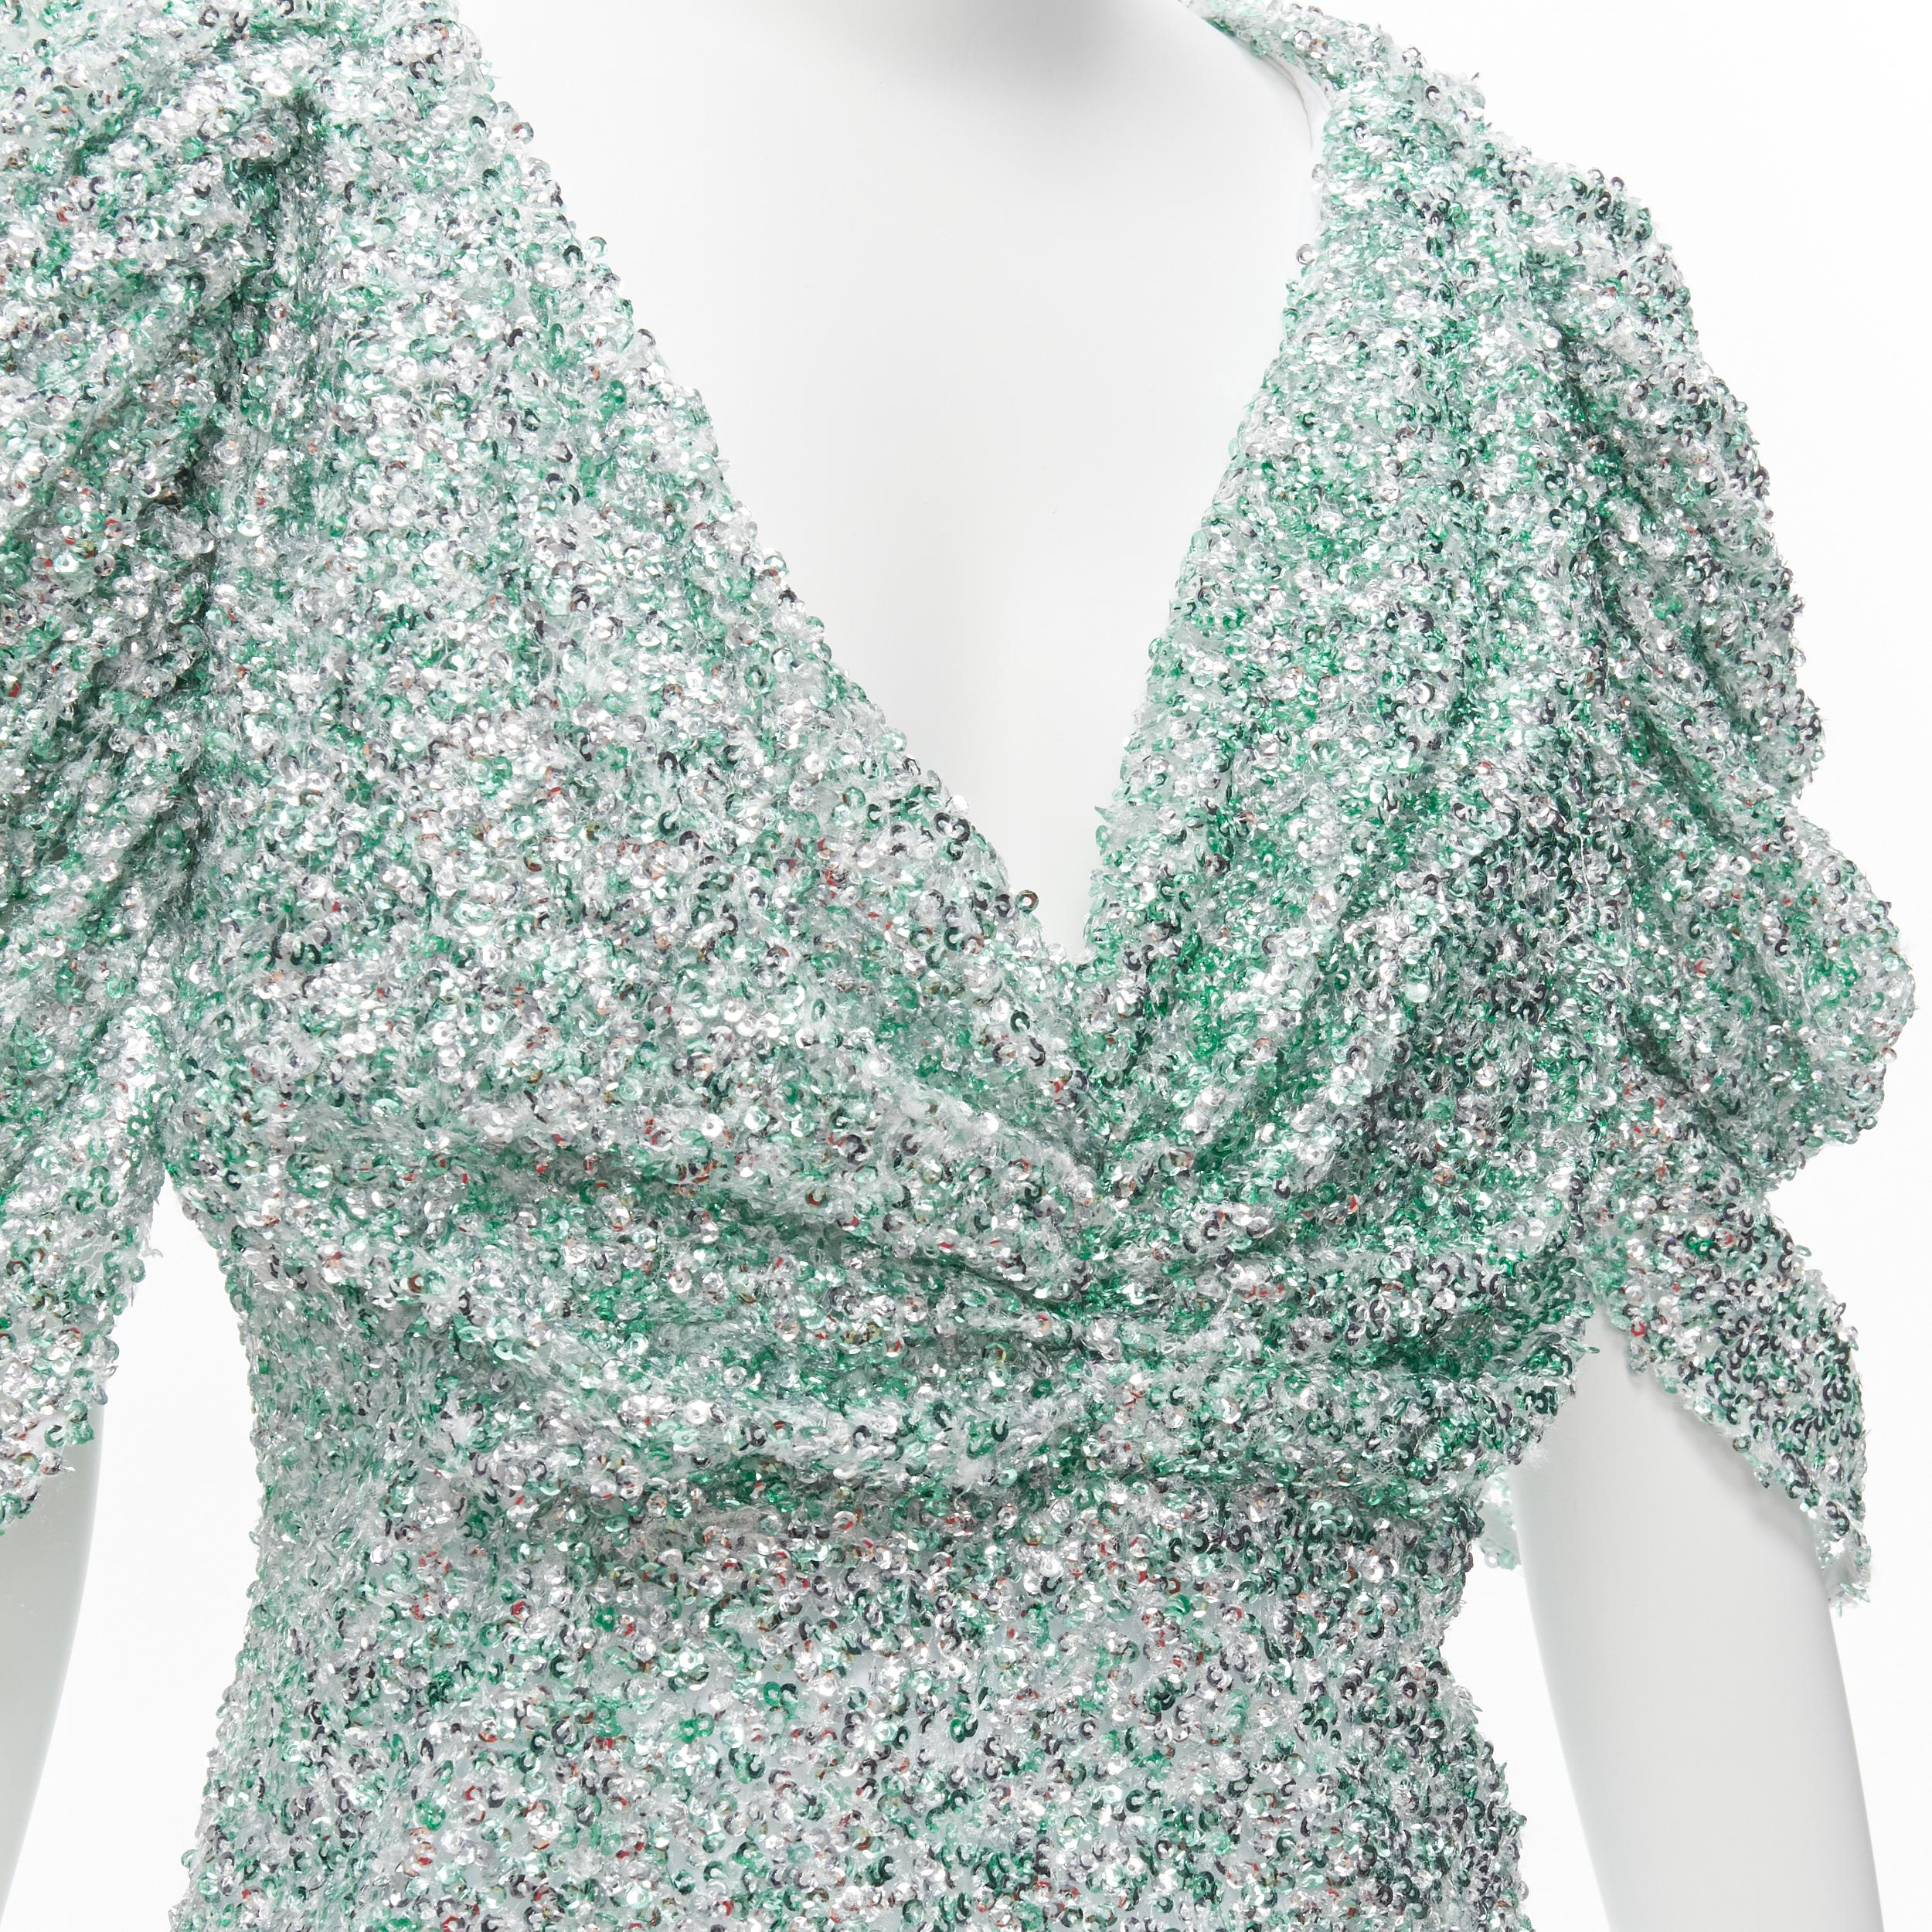 HALPERN seafoam green silver sequins deep V puff sleeves top FR36 XS
Reference: AAWC/A00453
Brand: Halpern
Material: Polyester
Color: Green, Silver
Pattern: Sequins
Closure: Zip
Lining: White Polyester
Extra Details: Back zip detail.
Made in: United